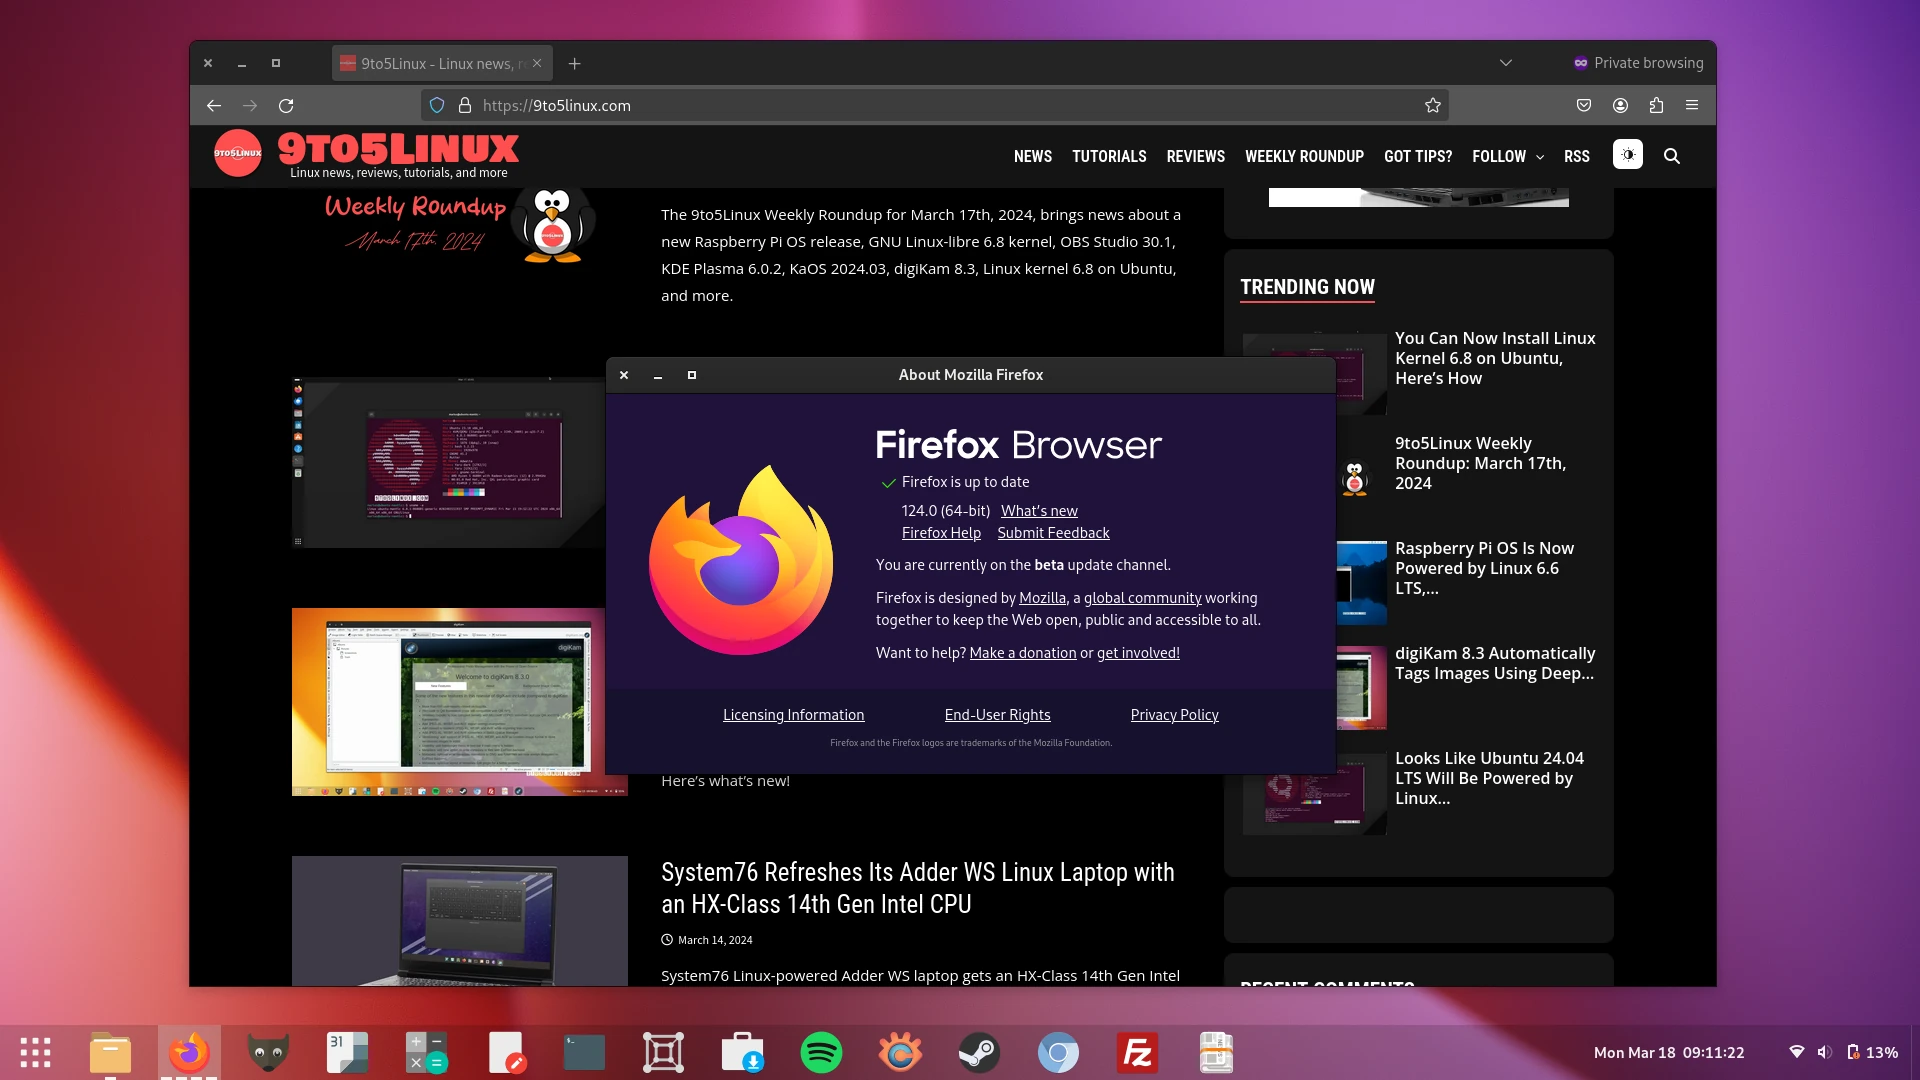 Mozilla Firefox 124 Is Now Available for Download, Here’s What’s New